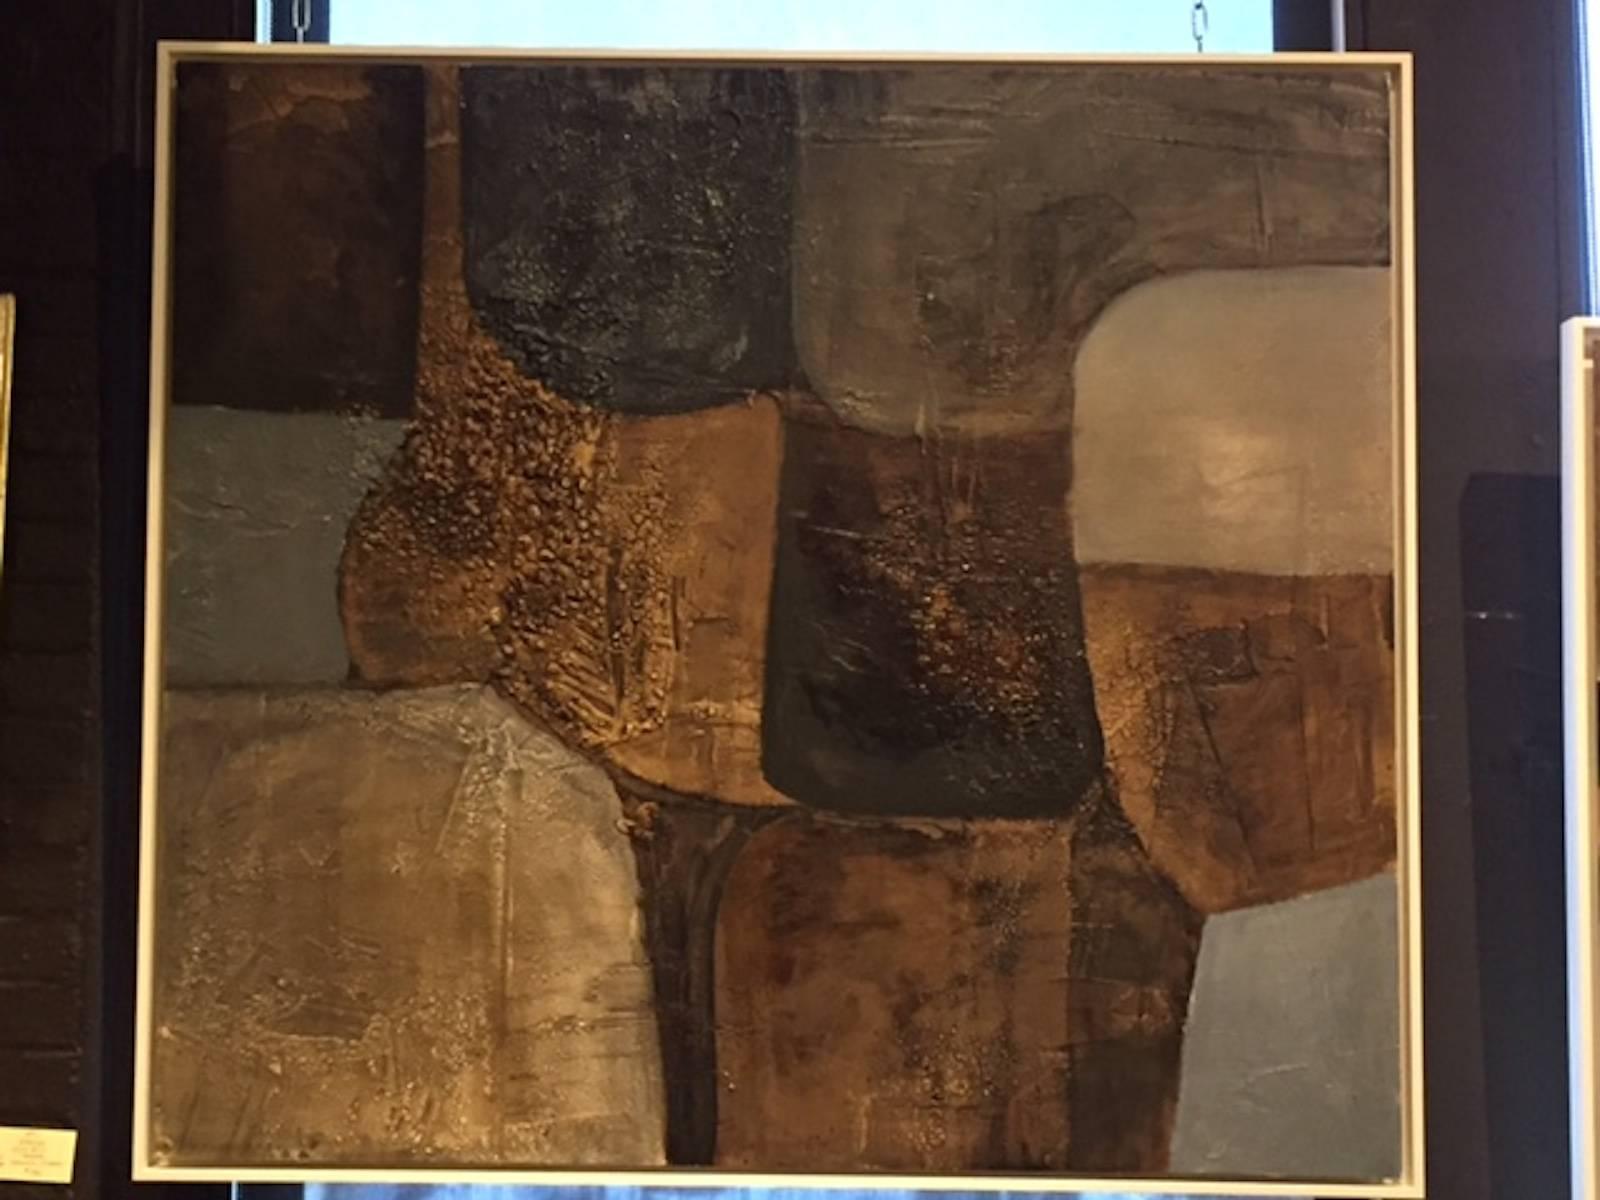 Contemporary painting by Spanish artist Santiago Castillo.
This large painting is created in oil and stucco. Multiple shapes in shades of browns and greys on wood. The stucco and a combination of matte and gloss paint finish create an interesting